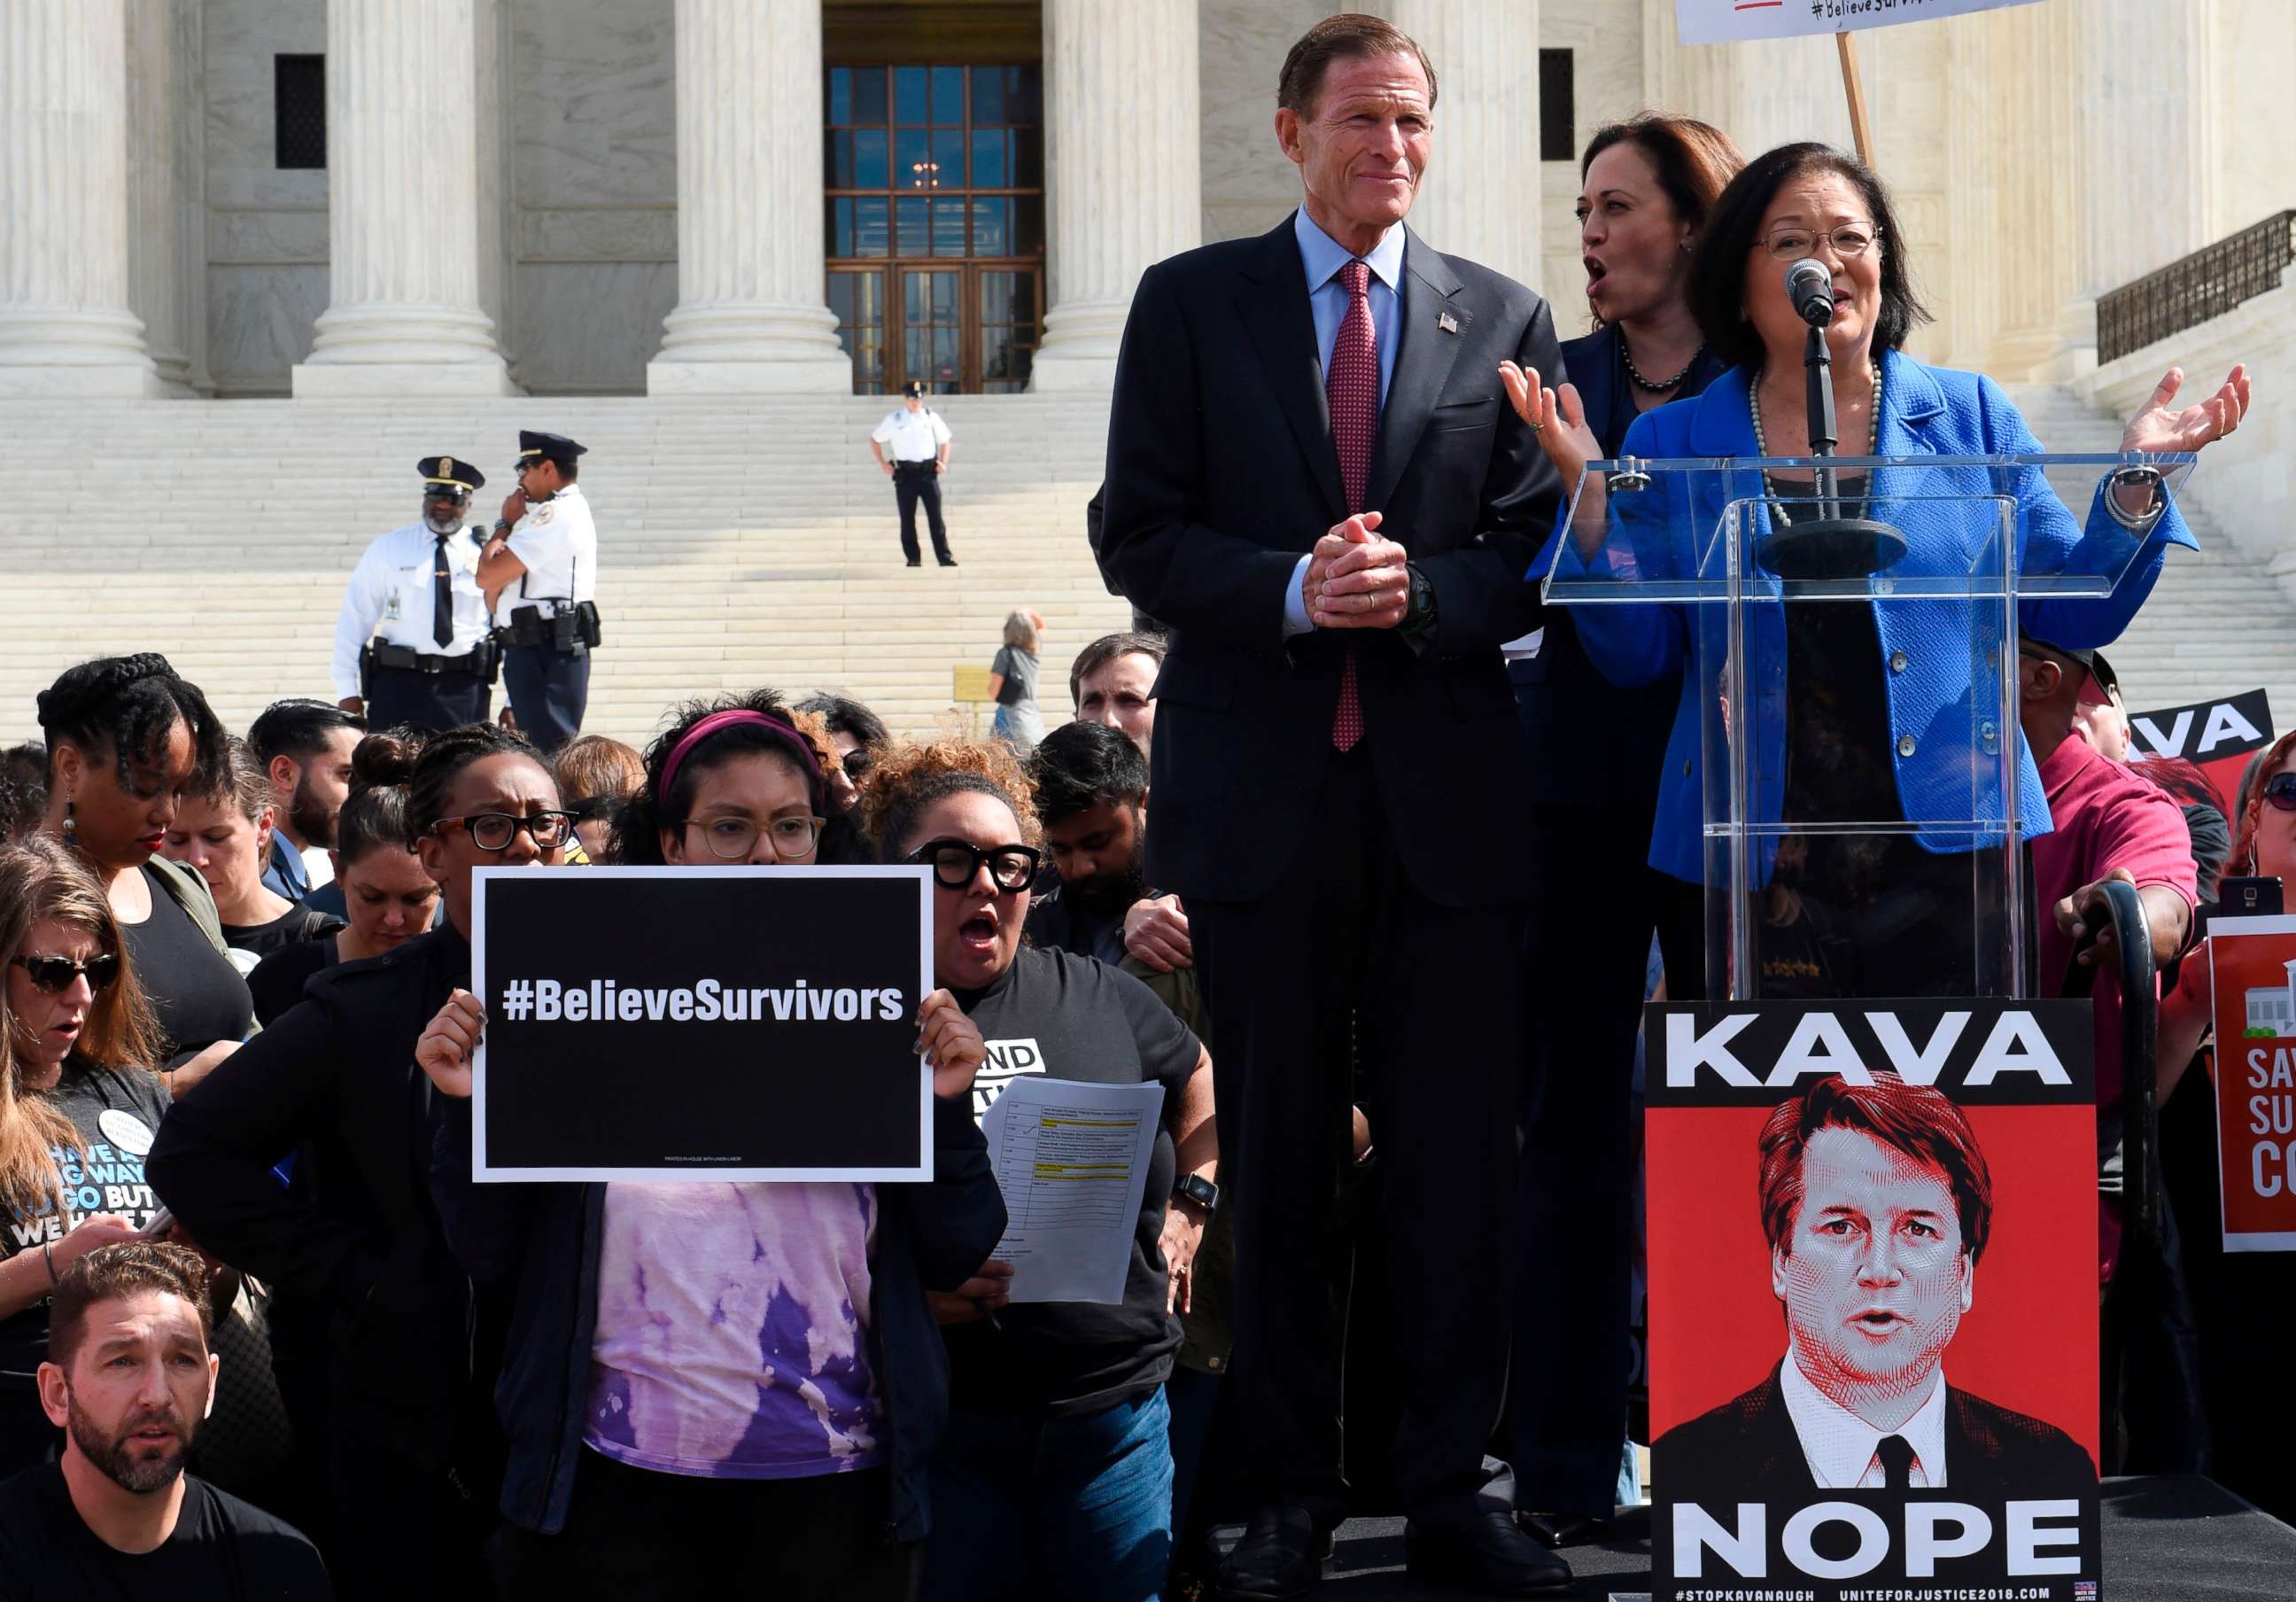 PHOTO: Democratic Senator Mazie Hirono address protesters against Brett Kavanaugh's Supreme Court nomination with Senators Richard Blumenthal and Kamala Harris at her side on the steps of the Supreme Court in Washington, Sept. 28, 2018. 
